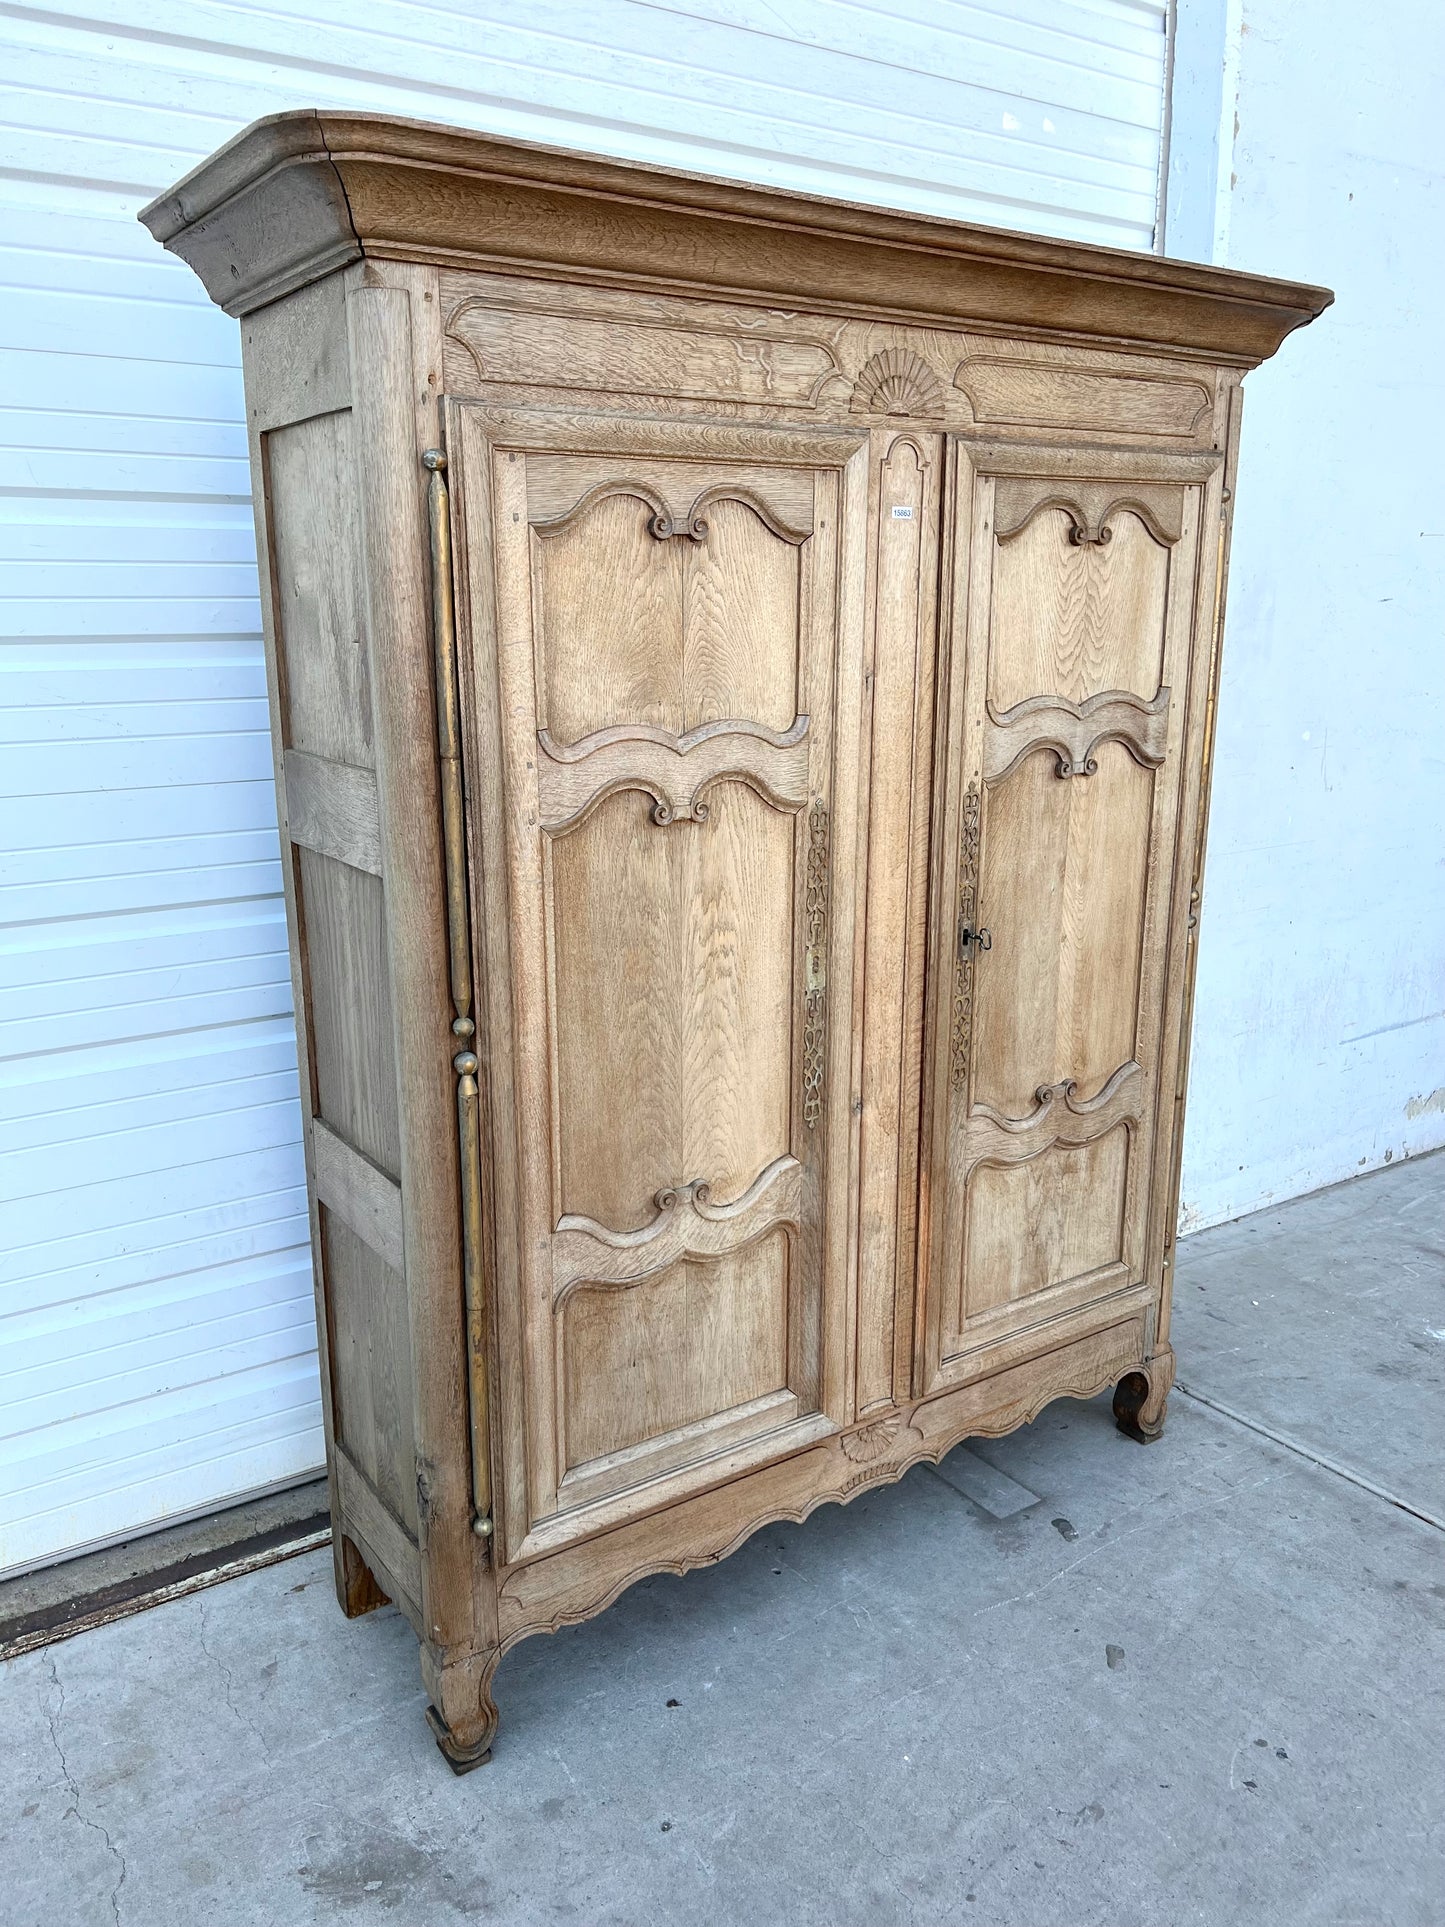 Bleached French Wardrobe Cabinet / Armoire, C.1840 Normandy, France